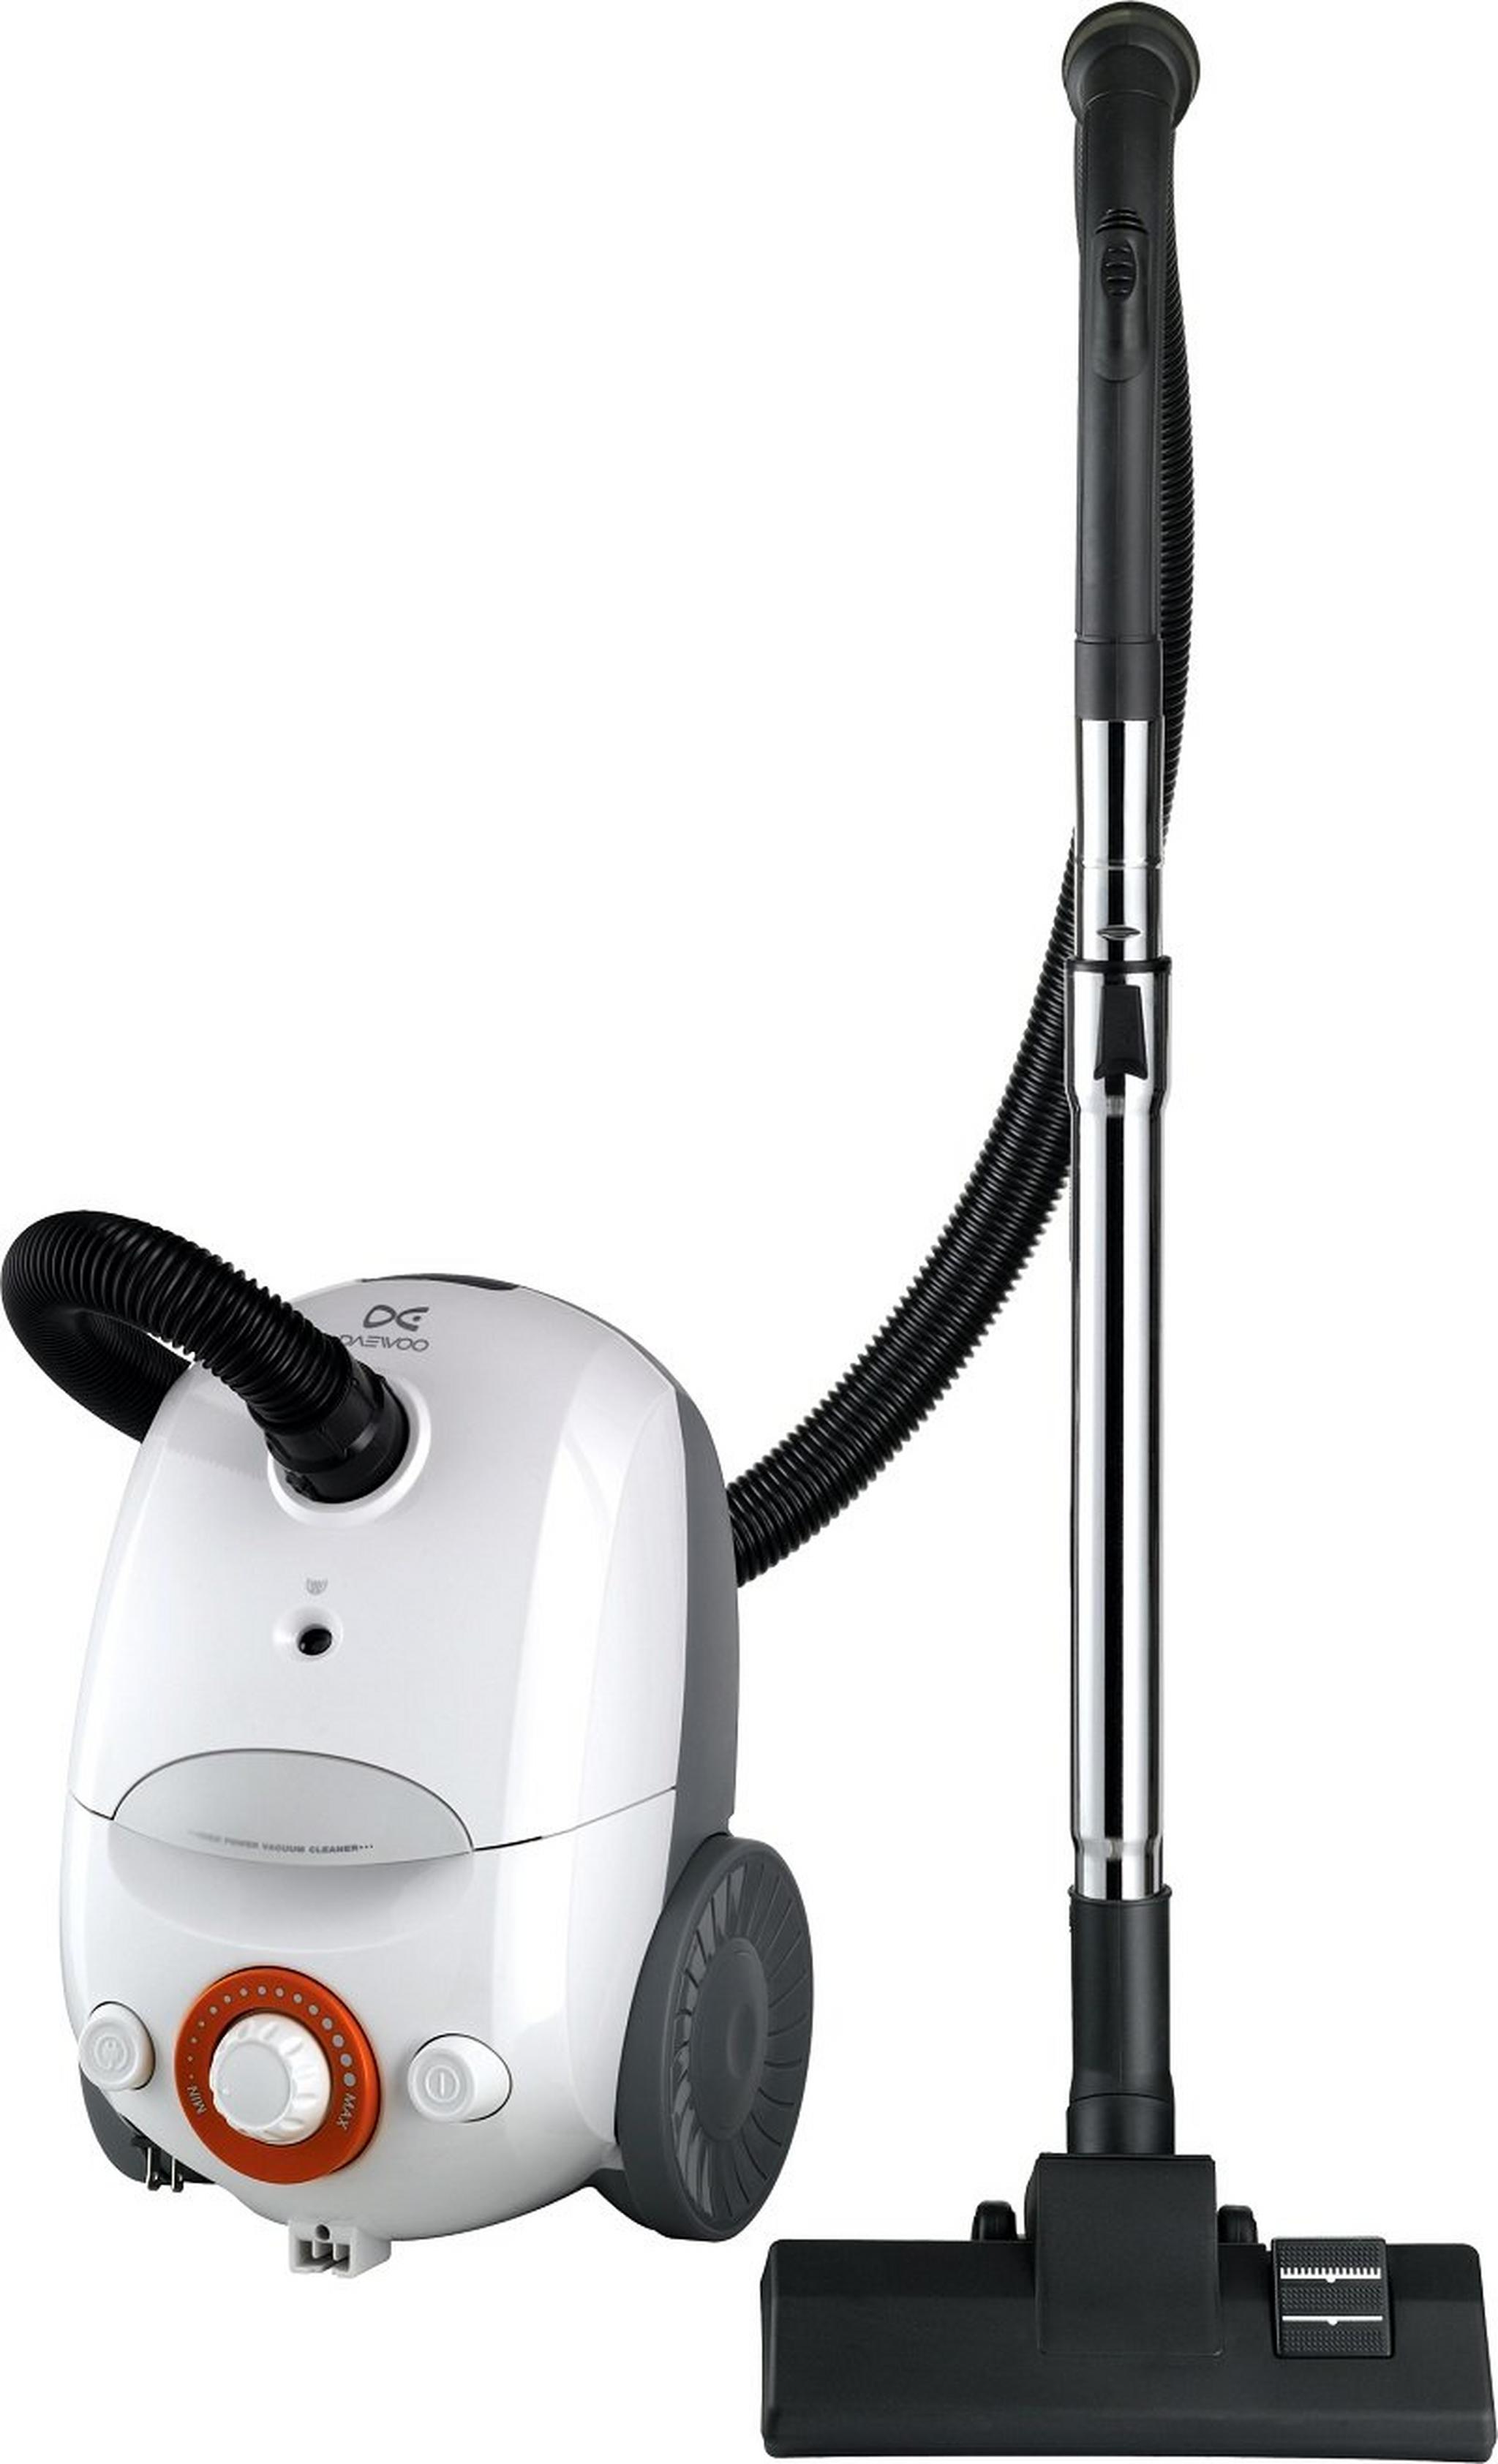 Daewoo Canister Vacuum Cleaner 1800 W